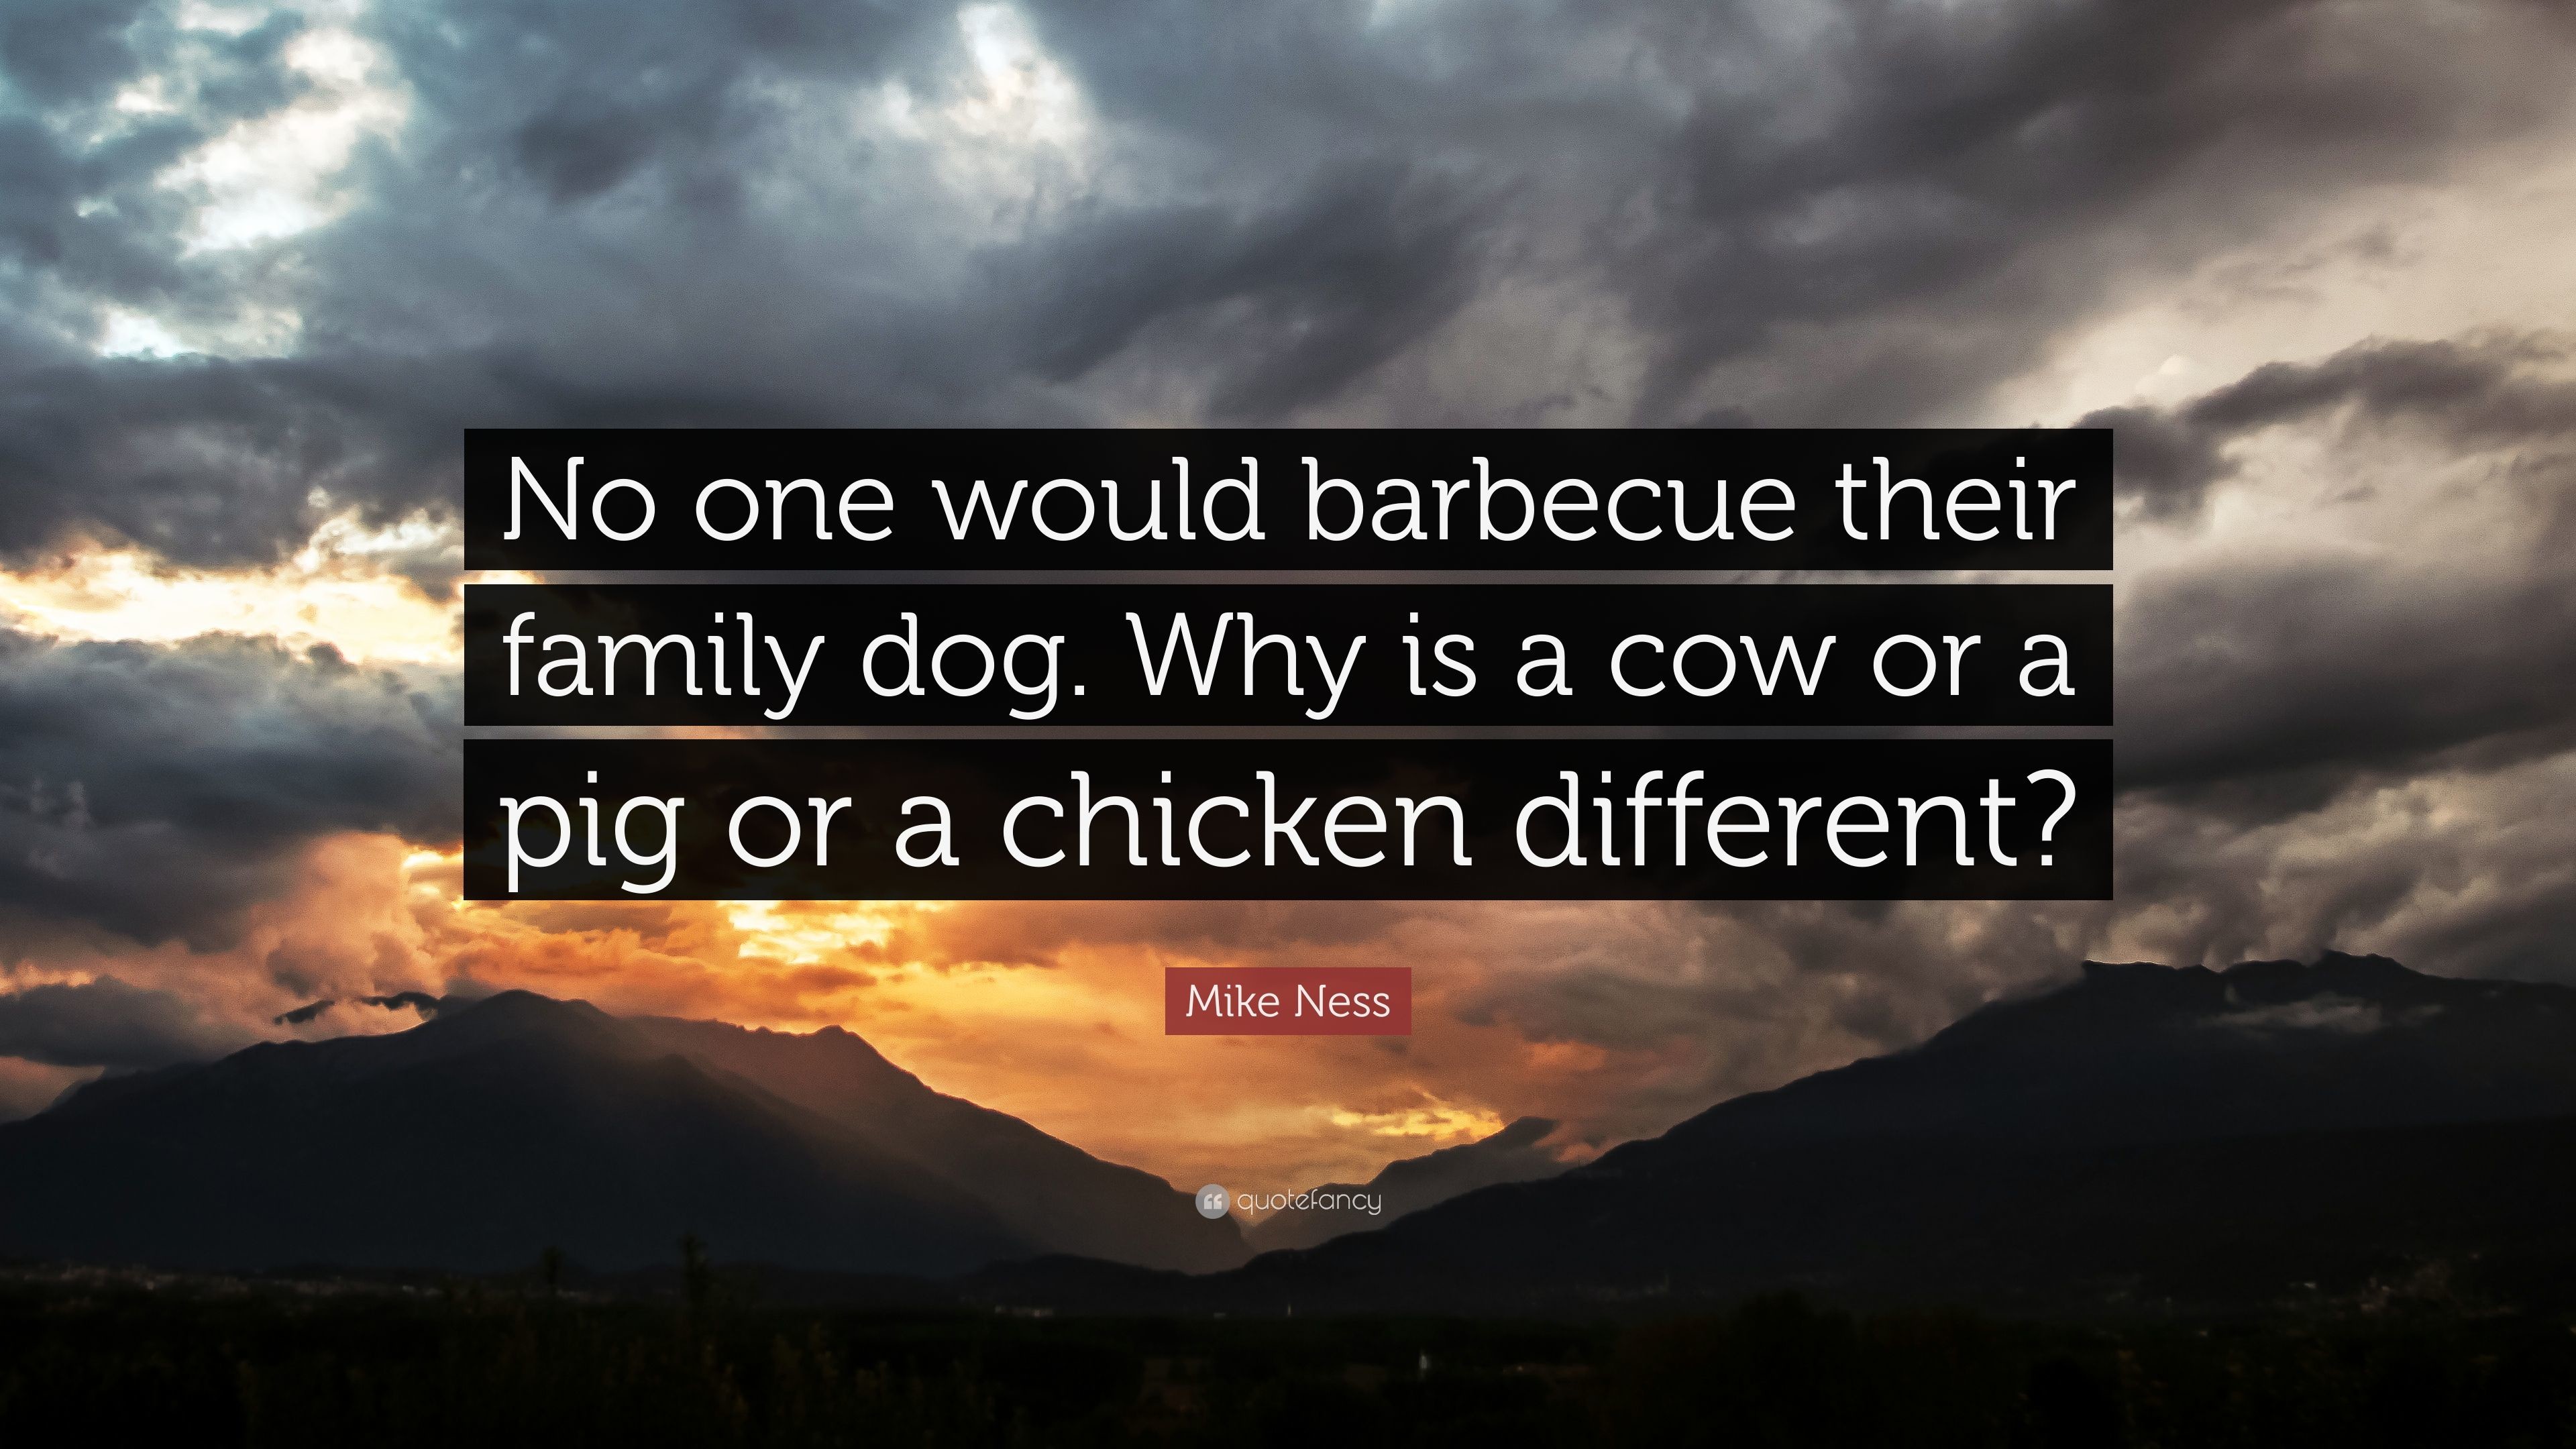 3840x2160 Mike Ness Quote: “No one would barbecue their family dog. Why is a